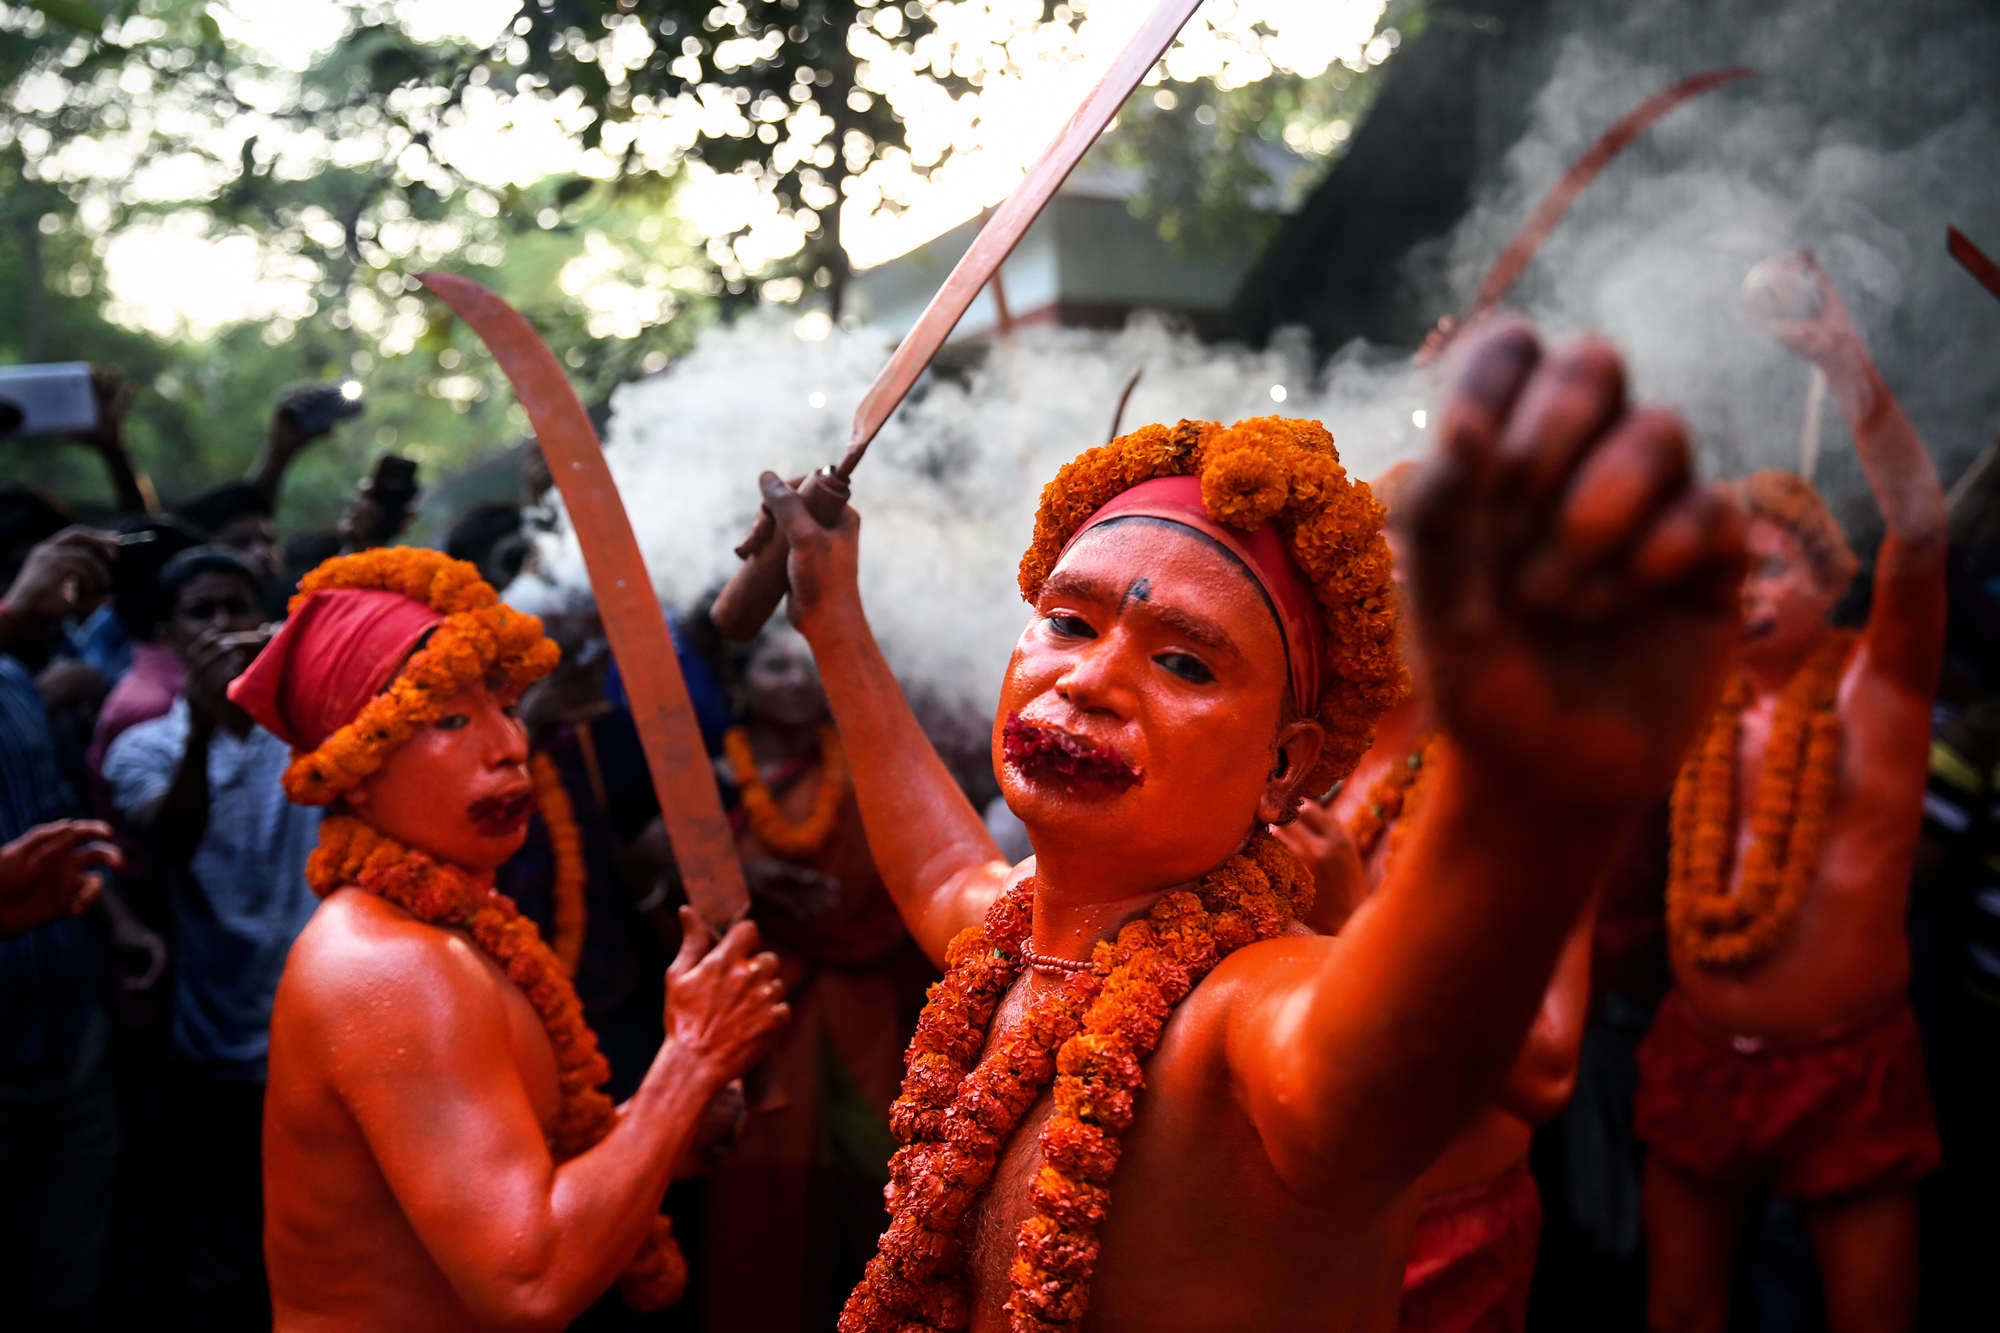 Hindu devotees dance on the street as they celebrate Lal Kach festival during the last day of the bengali month in Narayanganj, Bangladesh.